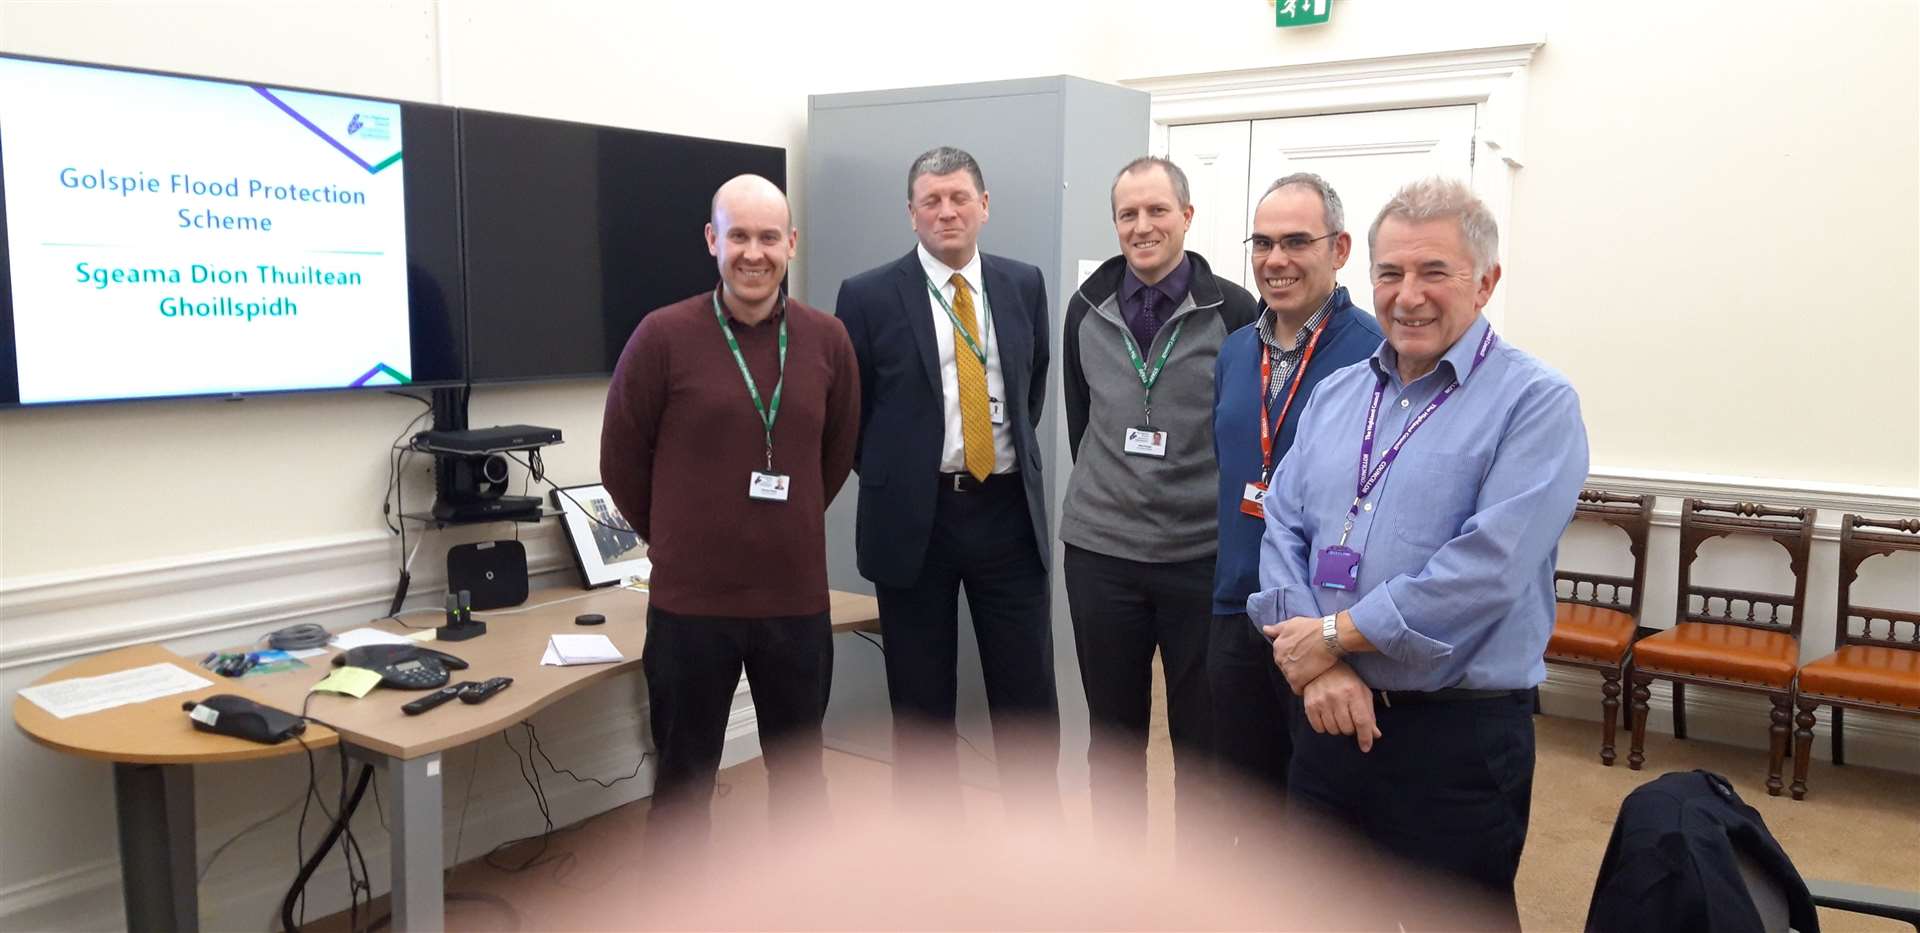 At the meeting were Highland Council officials Duncan Sharp, Colin Howell and Alan Fraser with engineer Dylan Huws and local ward councillor Richard Gale.